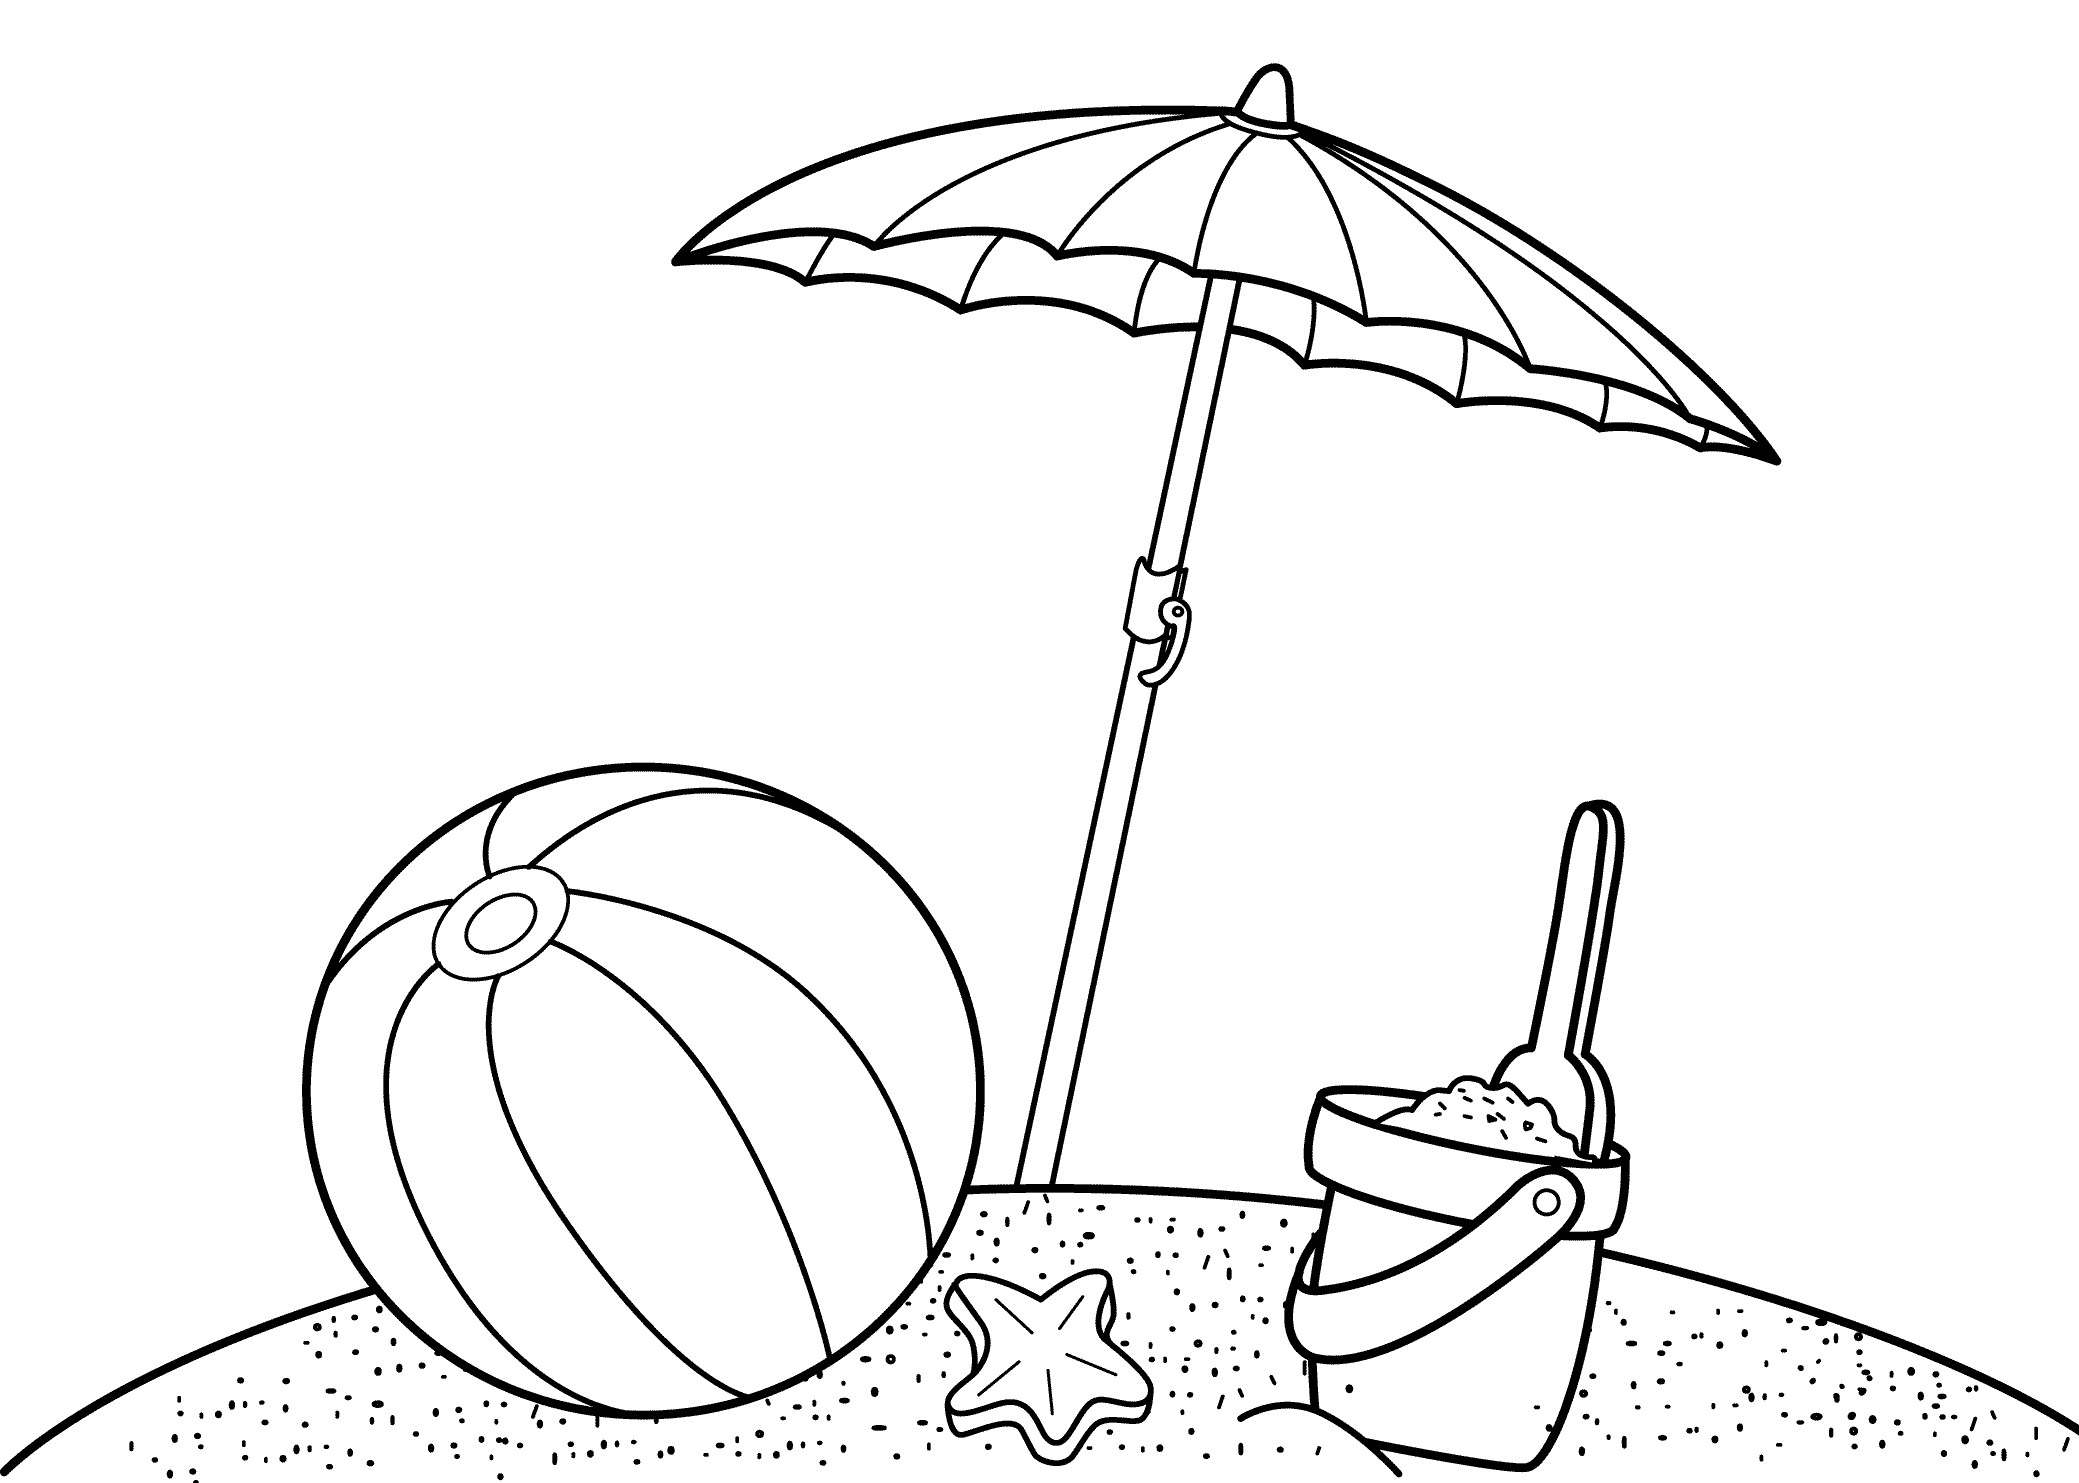 Printable Coloring Pages Summer
 Download Free Printable Summer Coloring Pages for Kids